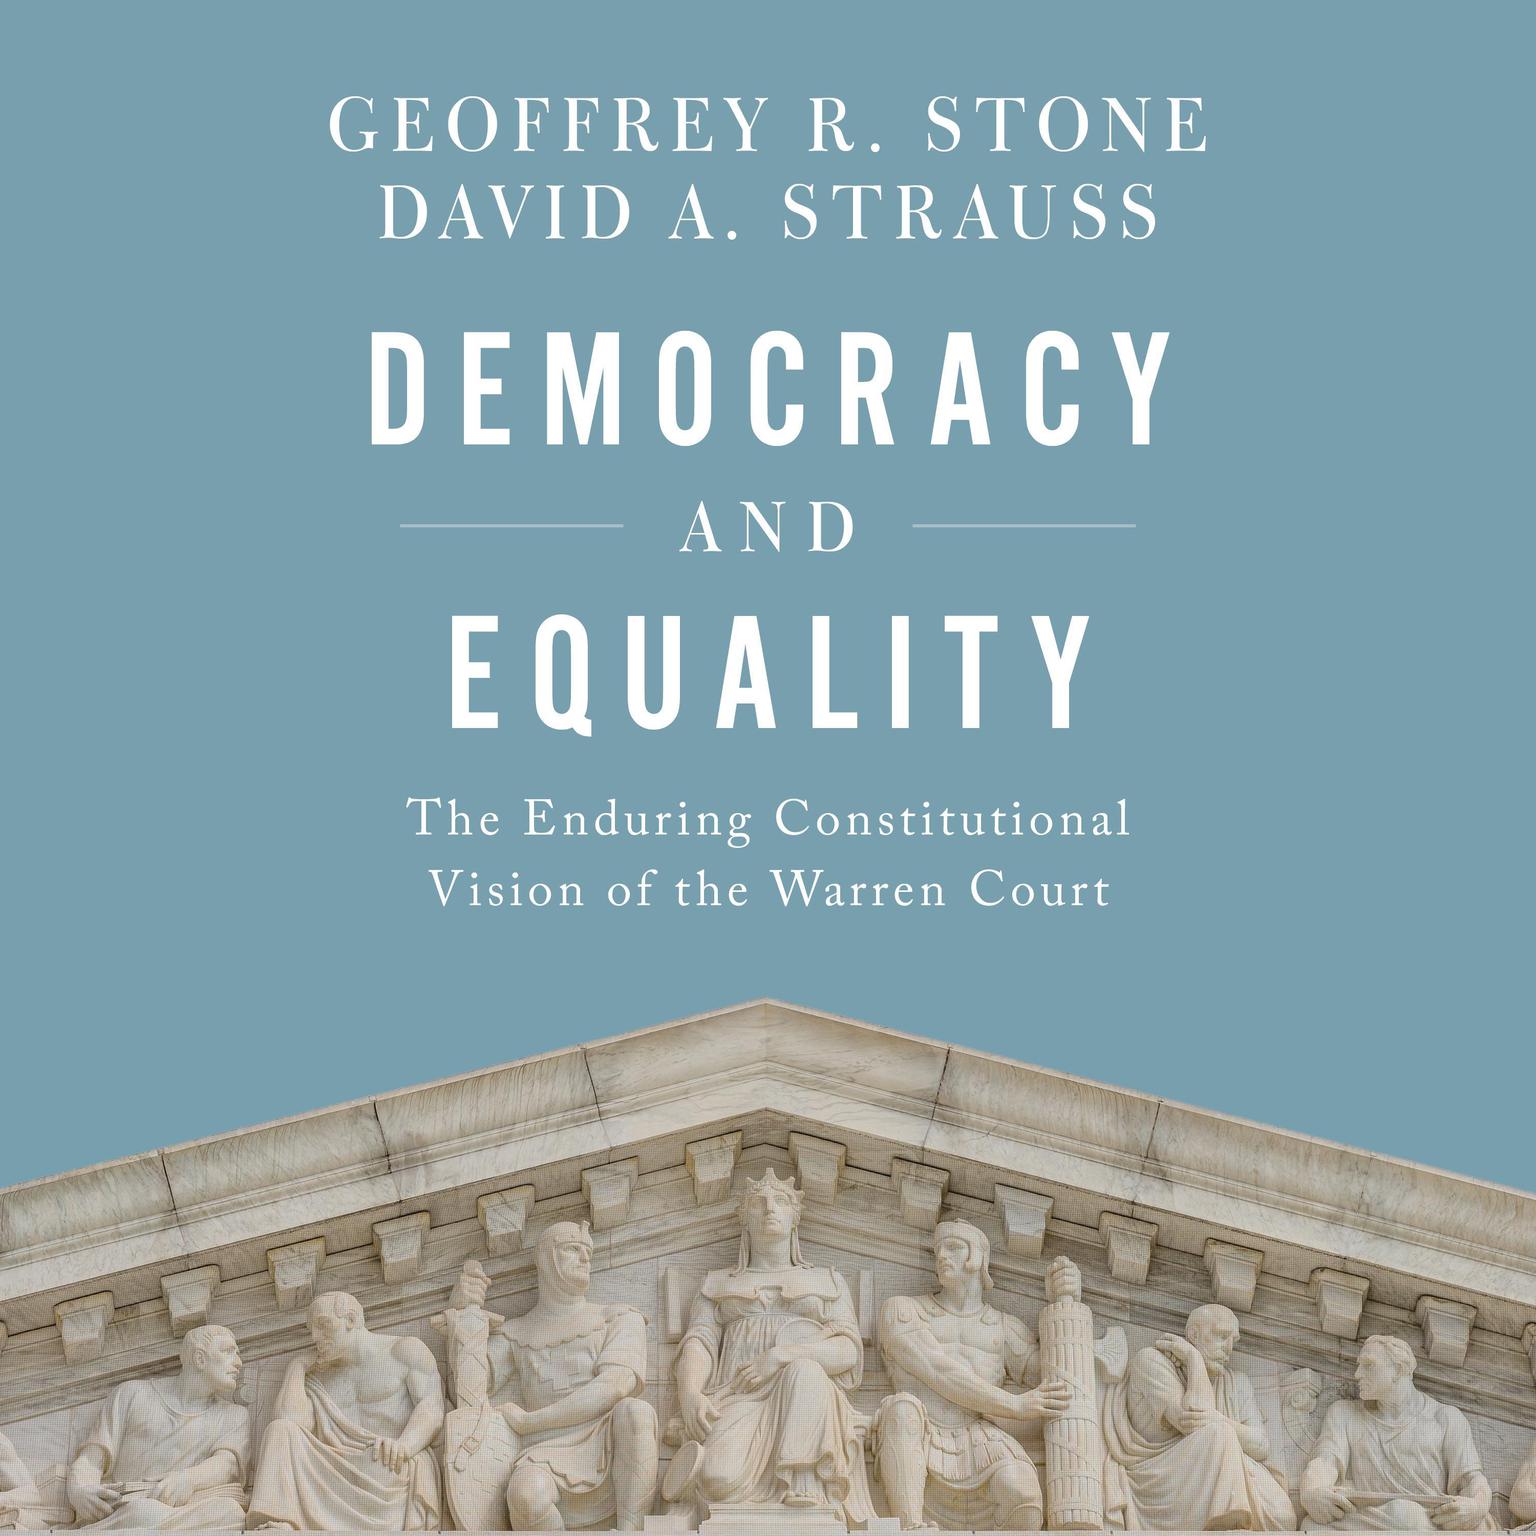 Democracy and Equality: The Enduring Constitutional Vision of the Warren Court Audiobook, by Geoffrey R. Stone